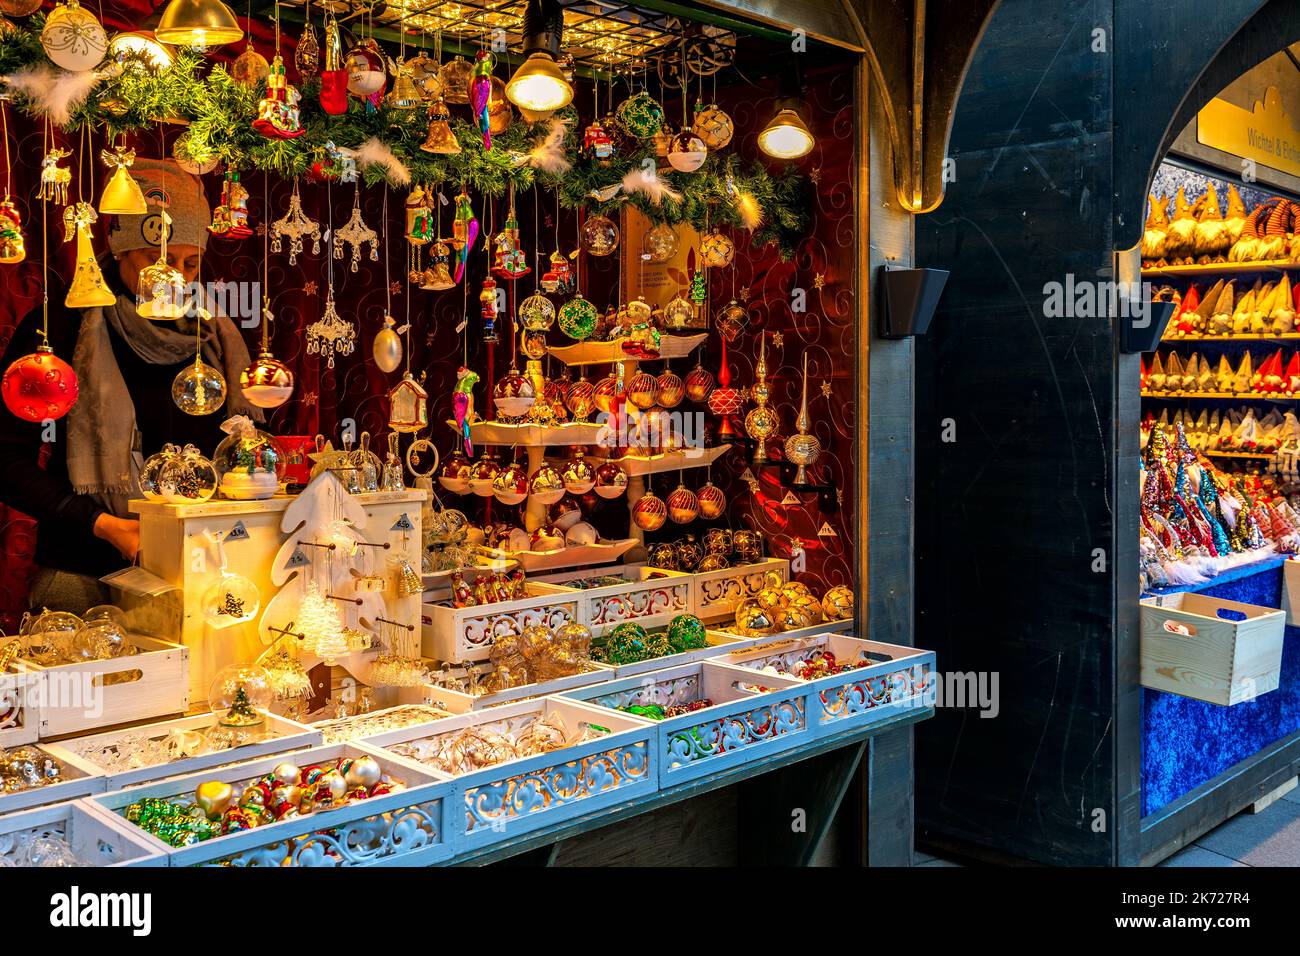 Handmade glass Christmas decorations on sale at street kiosk during famous traditional Christmas market in Vienna, Austria. Stock Photo